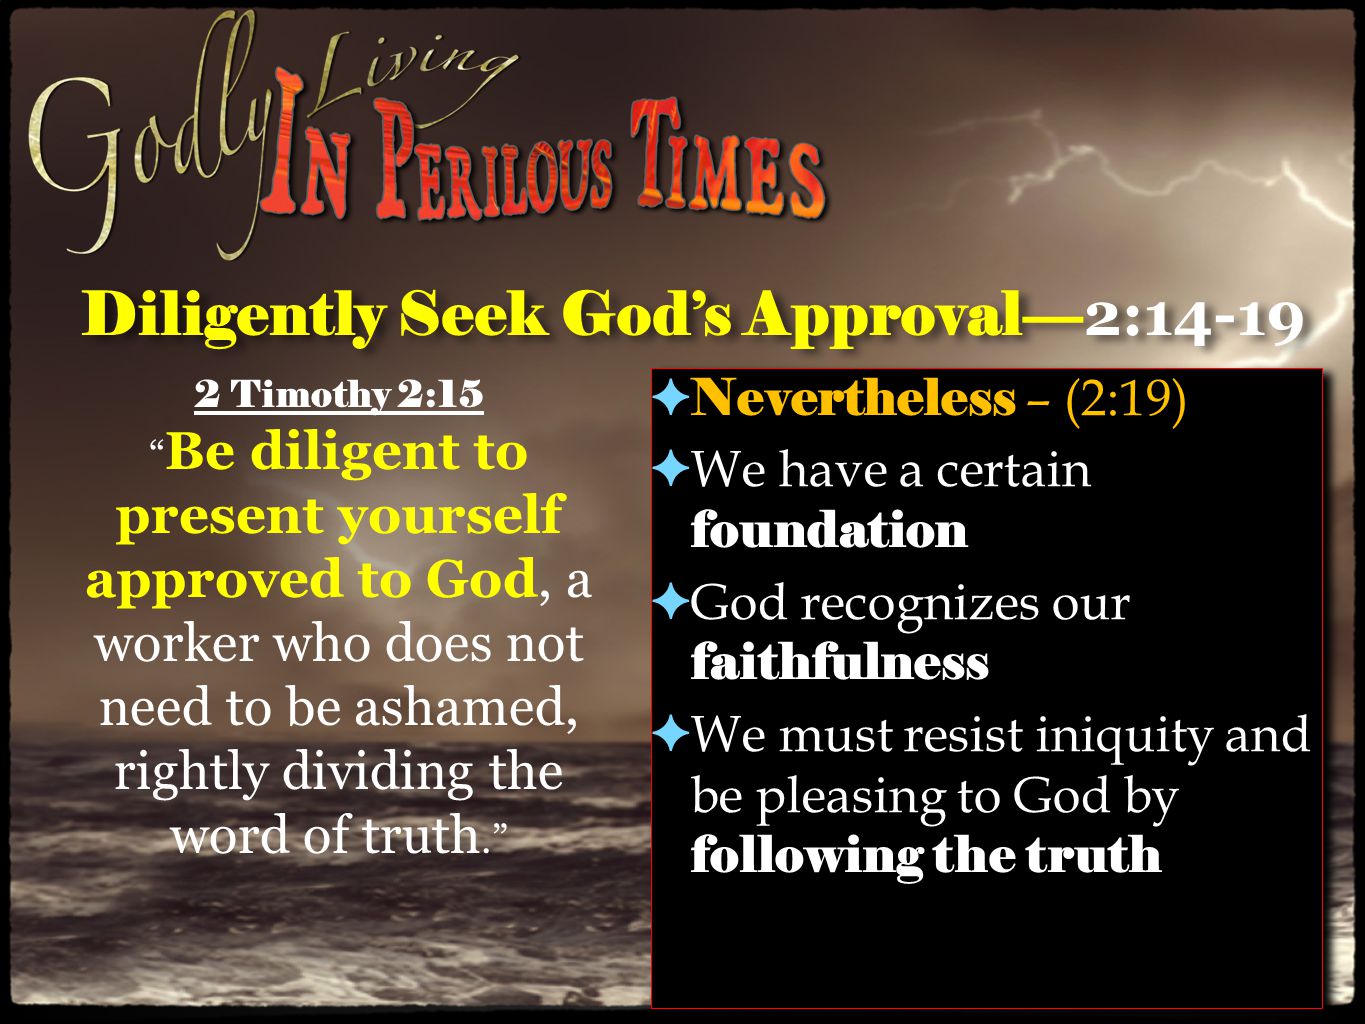 Diligently Seek God’s Approval— 2:14-19 ✦ Nevertheless – (2:19) ✦ We have a certain foundation ✦ God recognizes our faithfulness ✦ We must resist iniquity and be pleasing to God by following the truth ✦ Nevertheless – (2:19) ✦ We have a certain foundation ✦ God recognizes our faithfulness ✦ We must resist iniquity and be pleasing to God by following the truth 2 Timothy 2:15 Be diligent to present yourself approved to God, a worker who does not need to be ashamed, rightly dividing the word of truth.